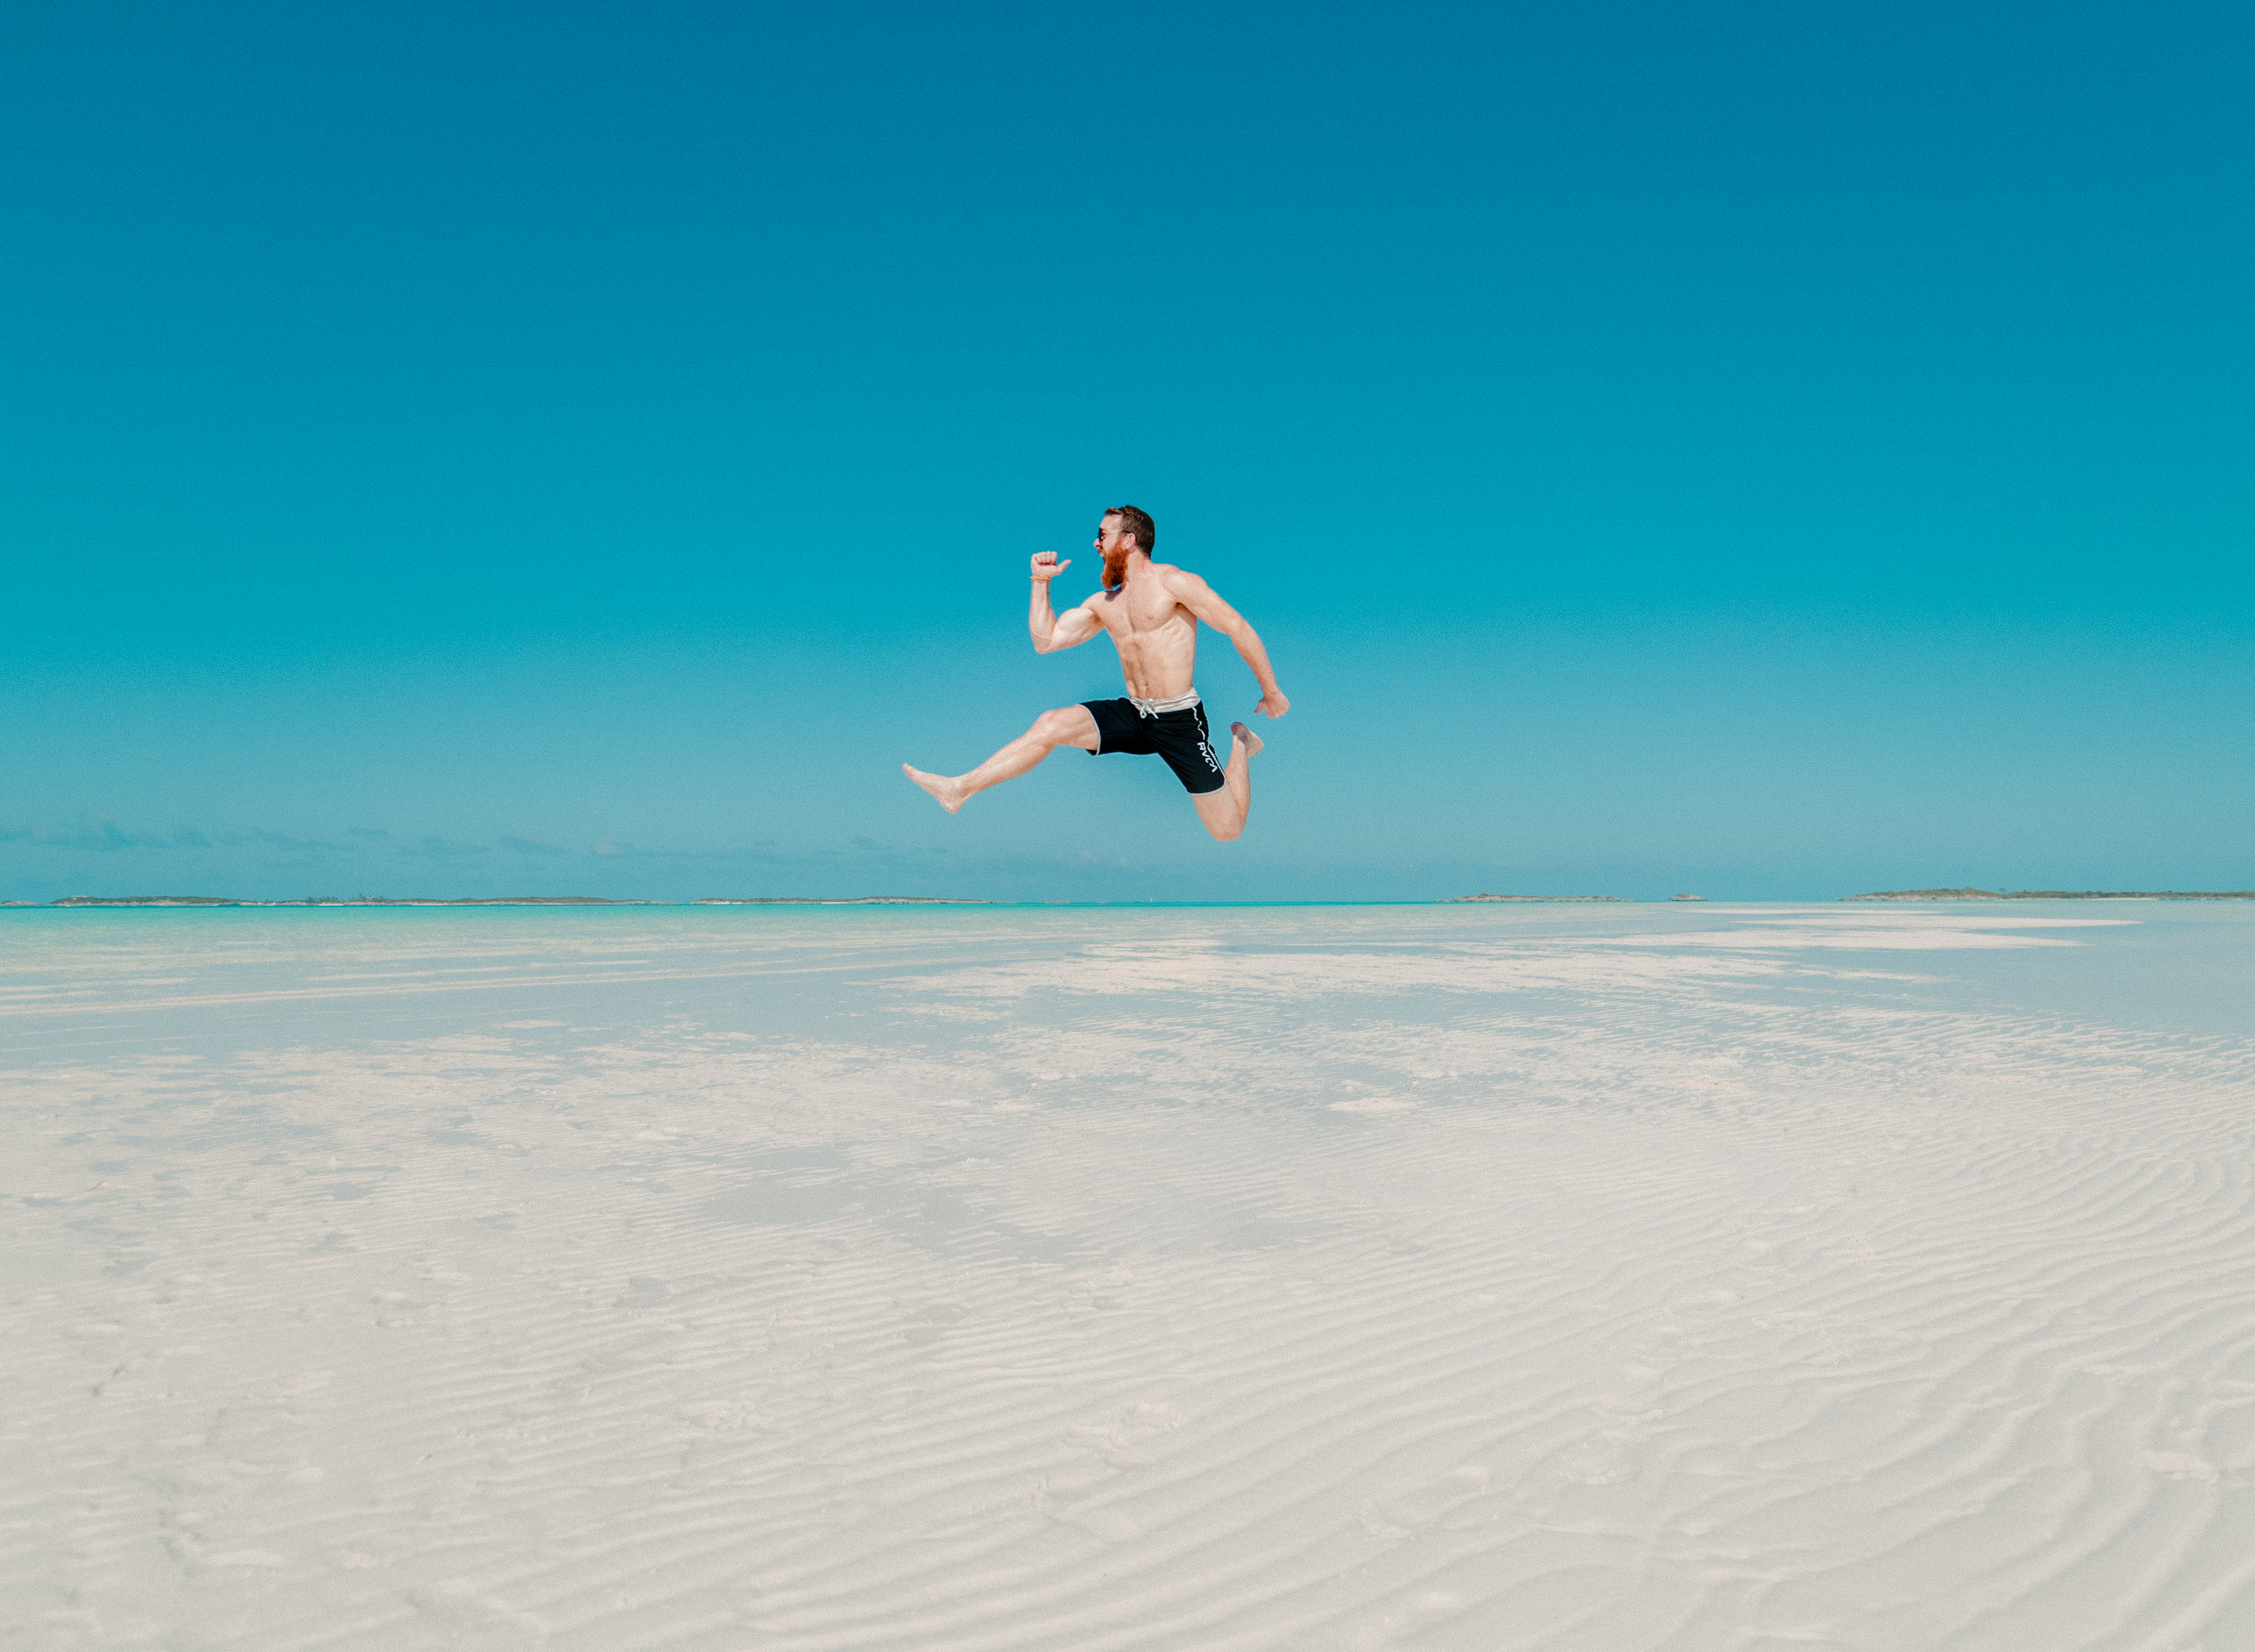 Man jumping at the beach on the sand on bright summer day - Enjoy ...